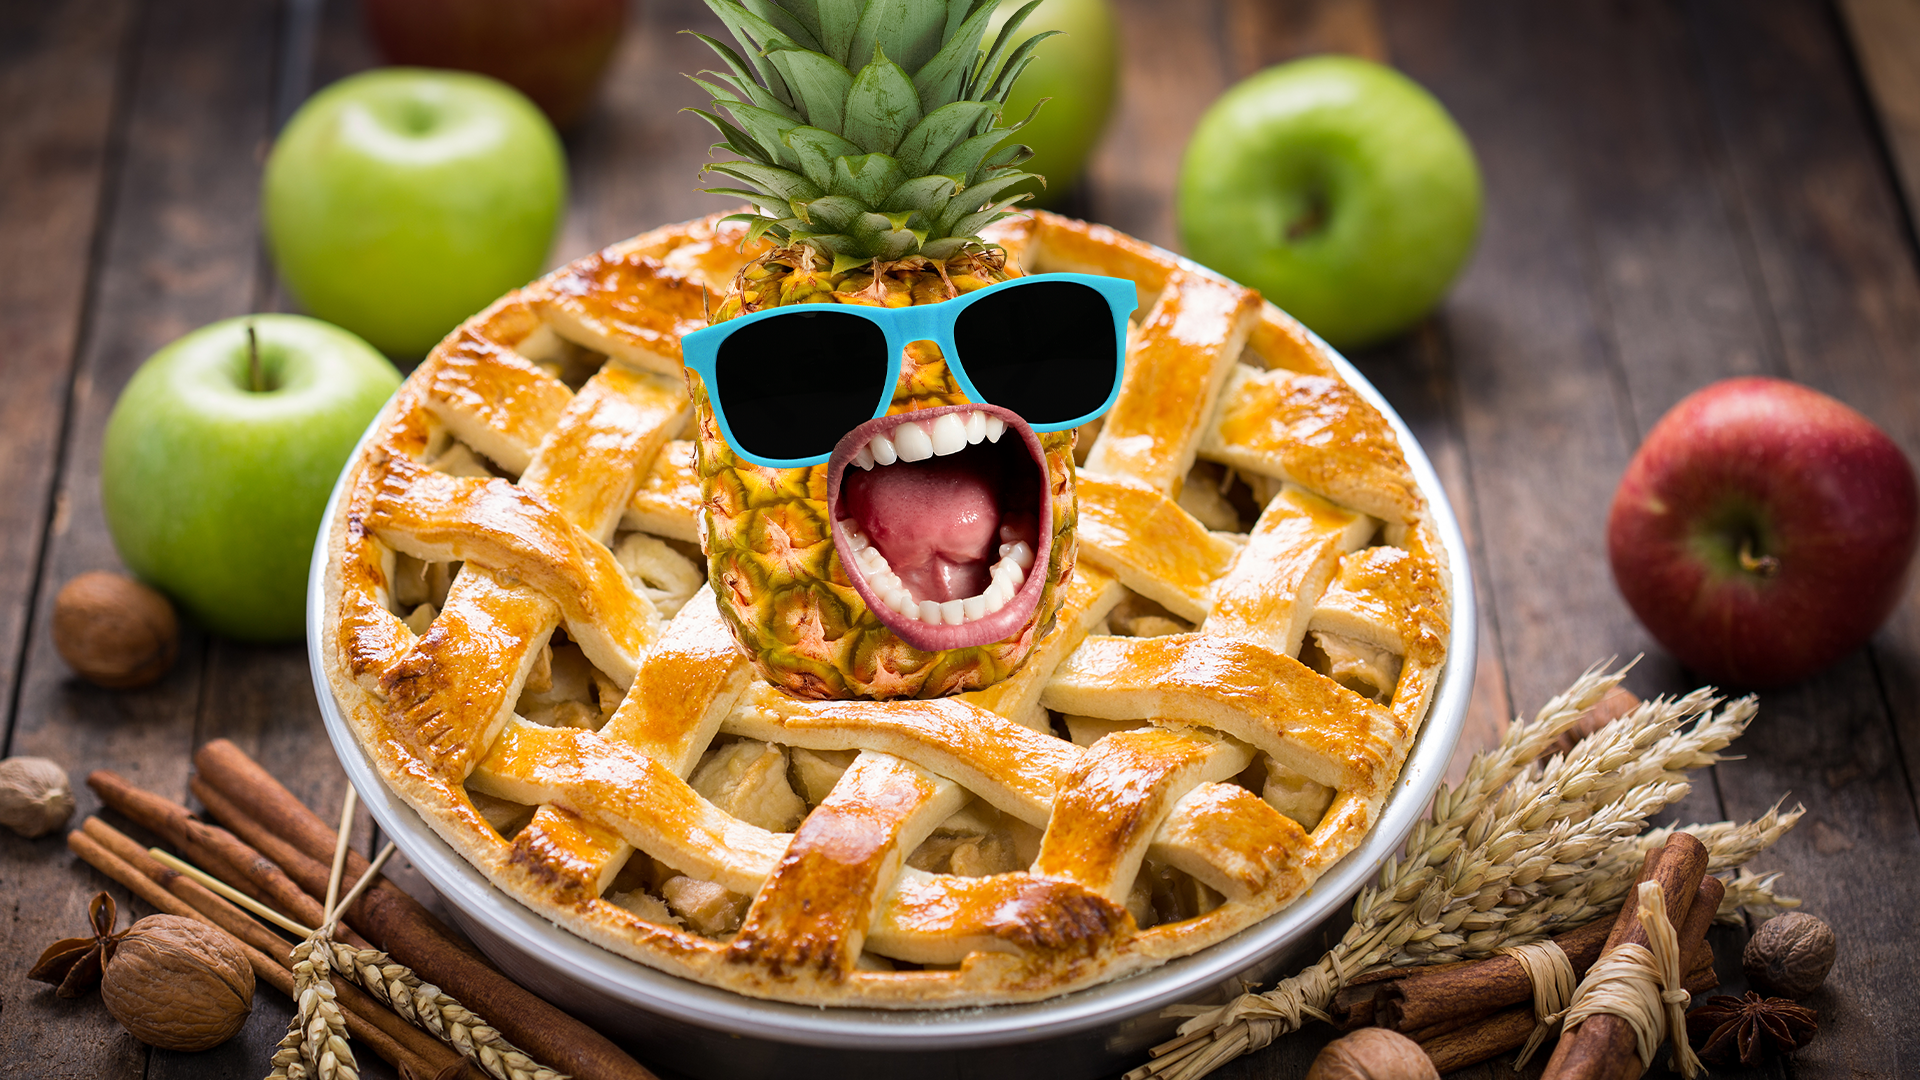 Apple pie with pineapple